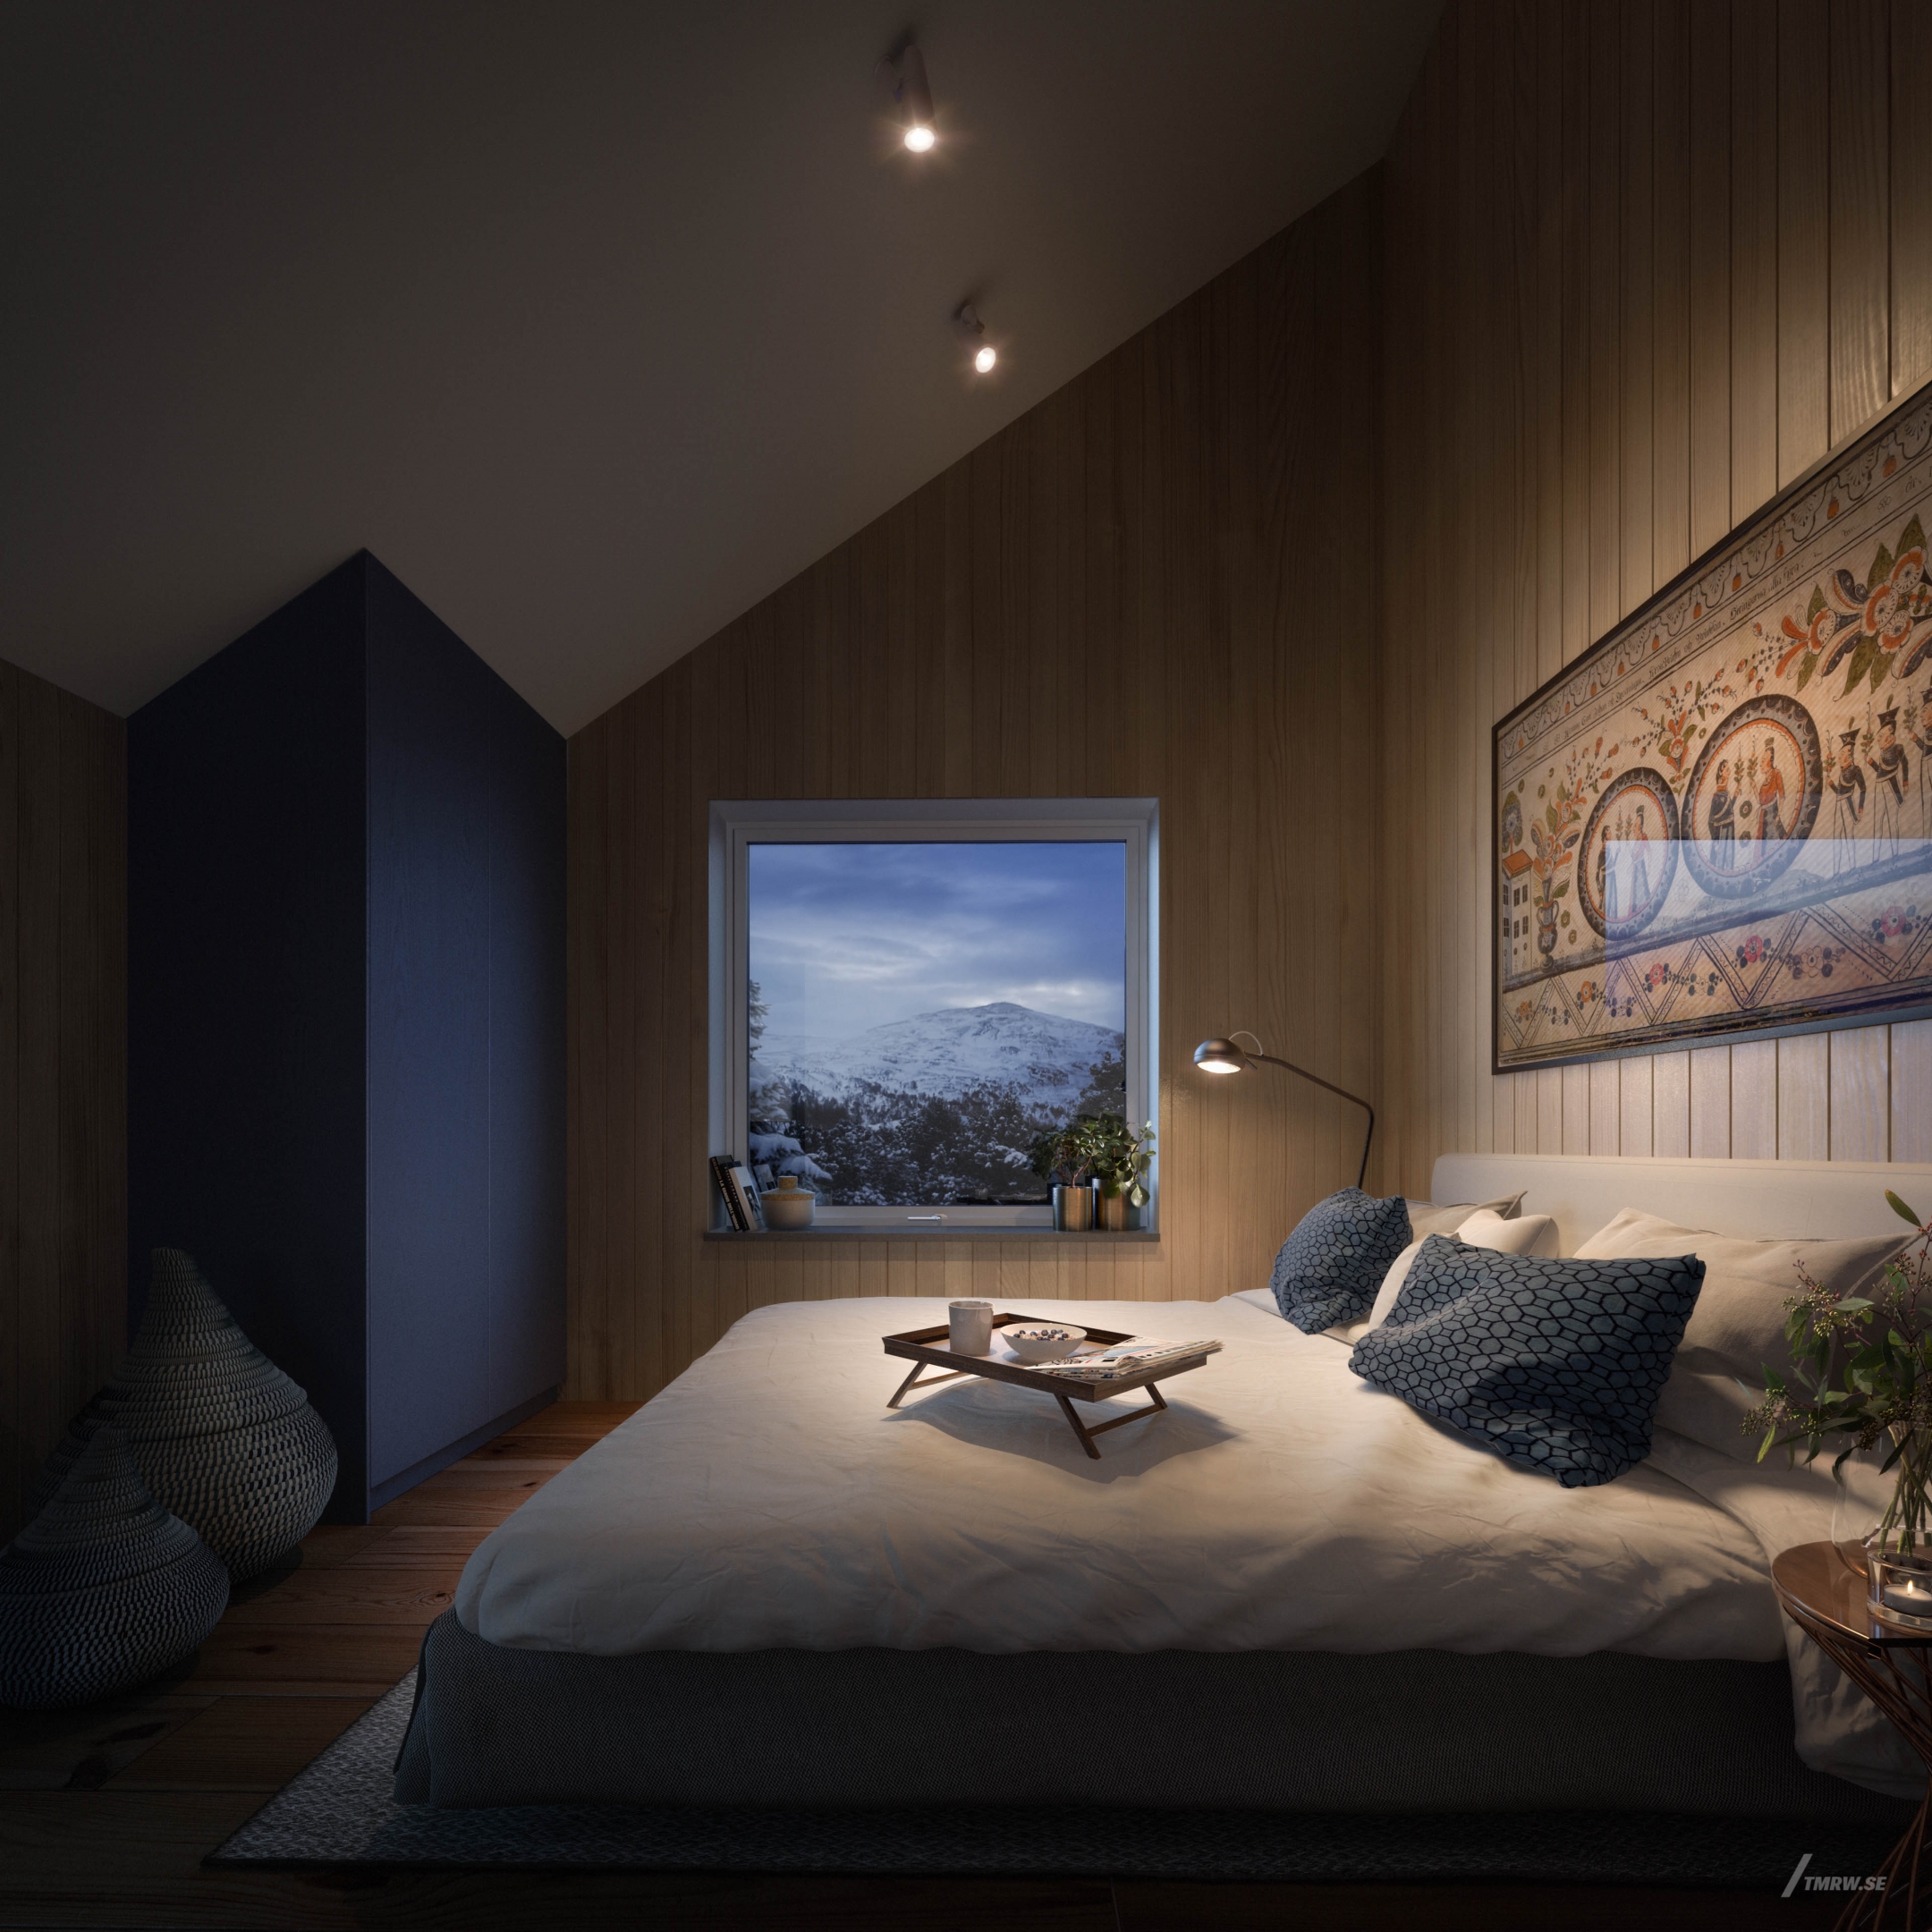 Architectural visualization of Hills365 for Bleck, interior of a bed room in dusk, views of snow-capped mountains